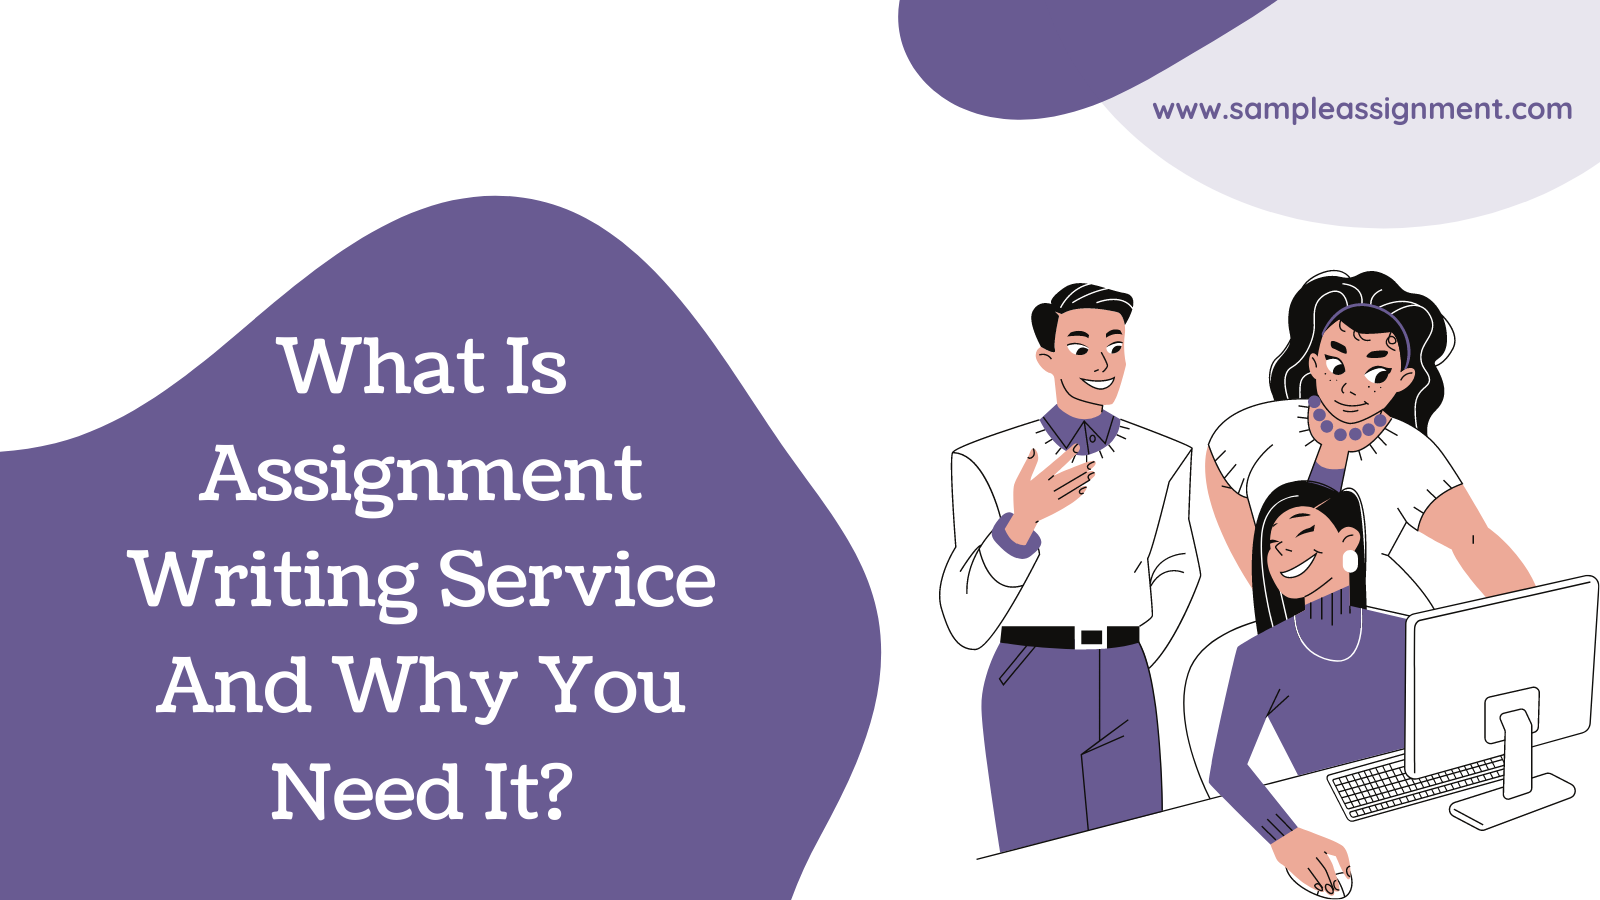 What Is Assignment Writing Service And Why You Need It?